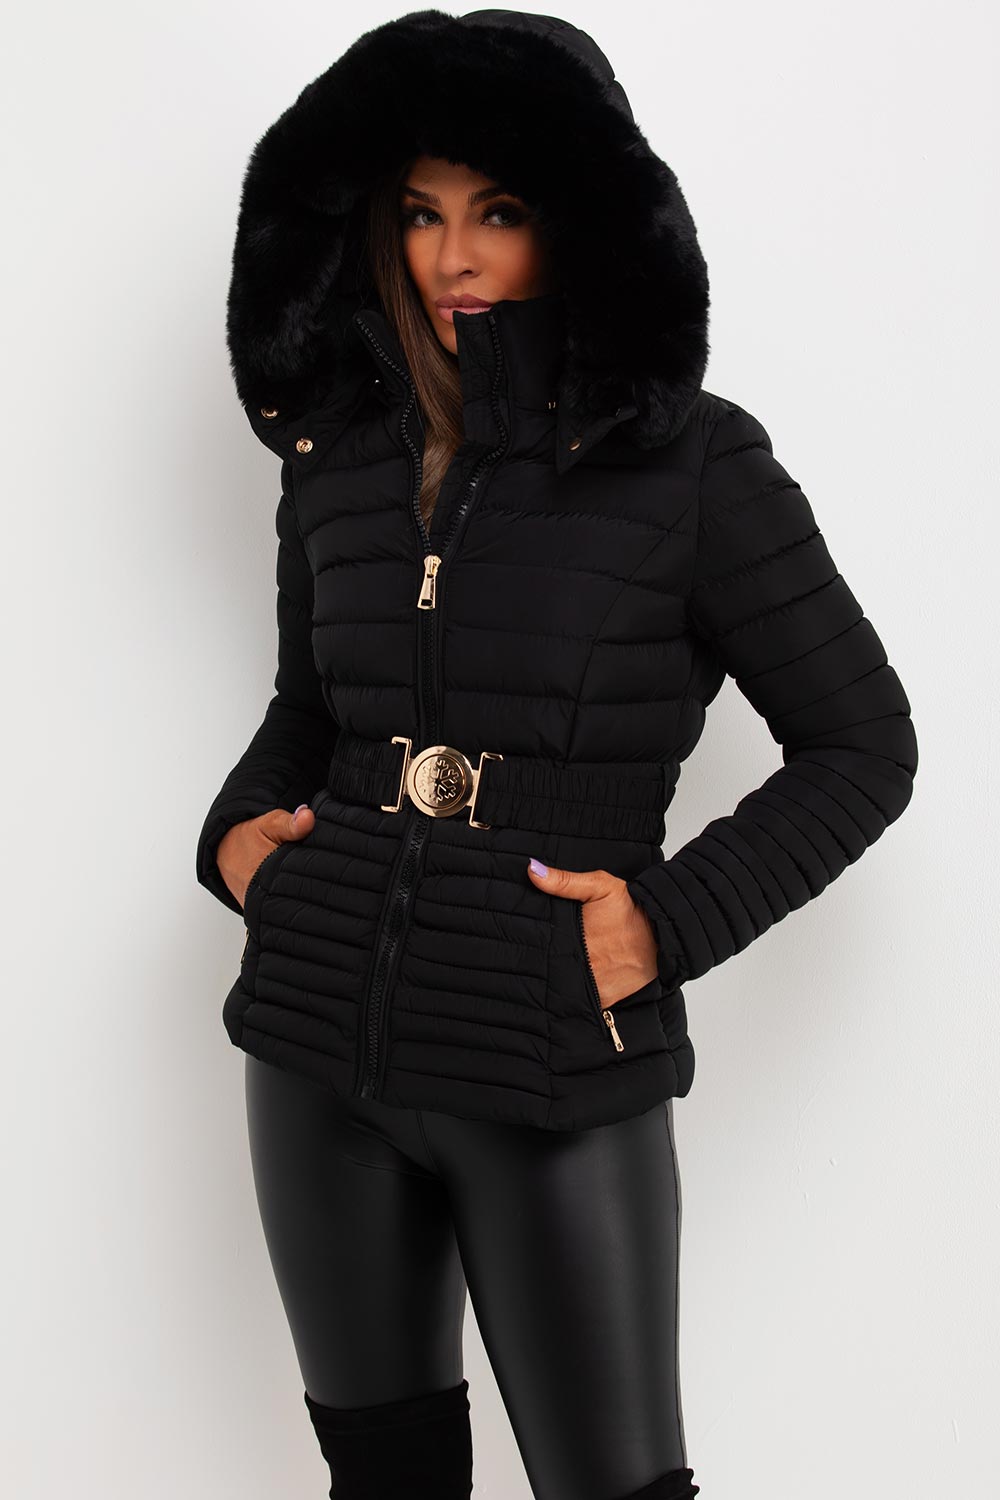 Women's Black Puffer Jacket With Faux Fur Hood And Gold Belt Outerwear ...